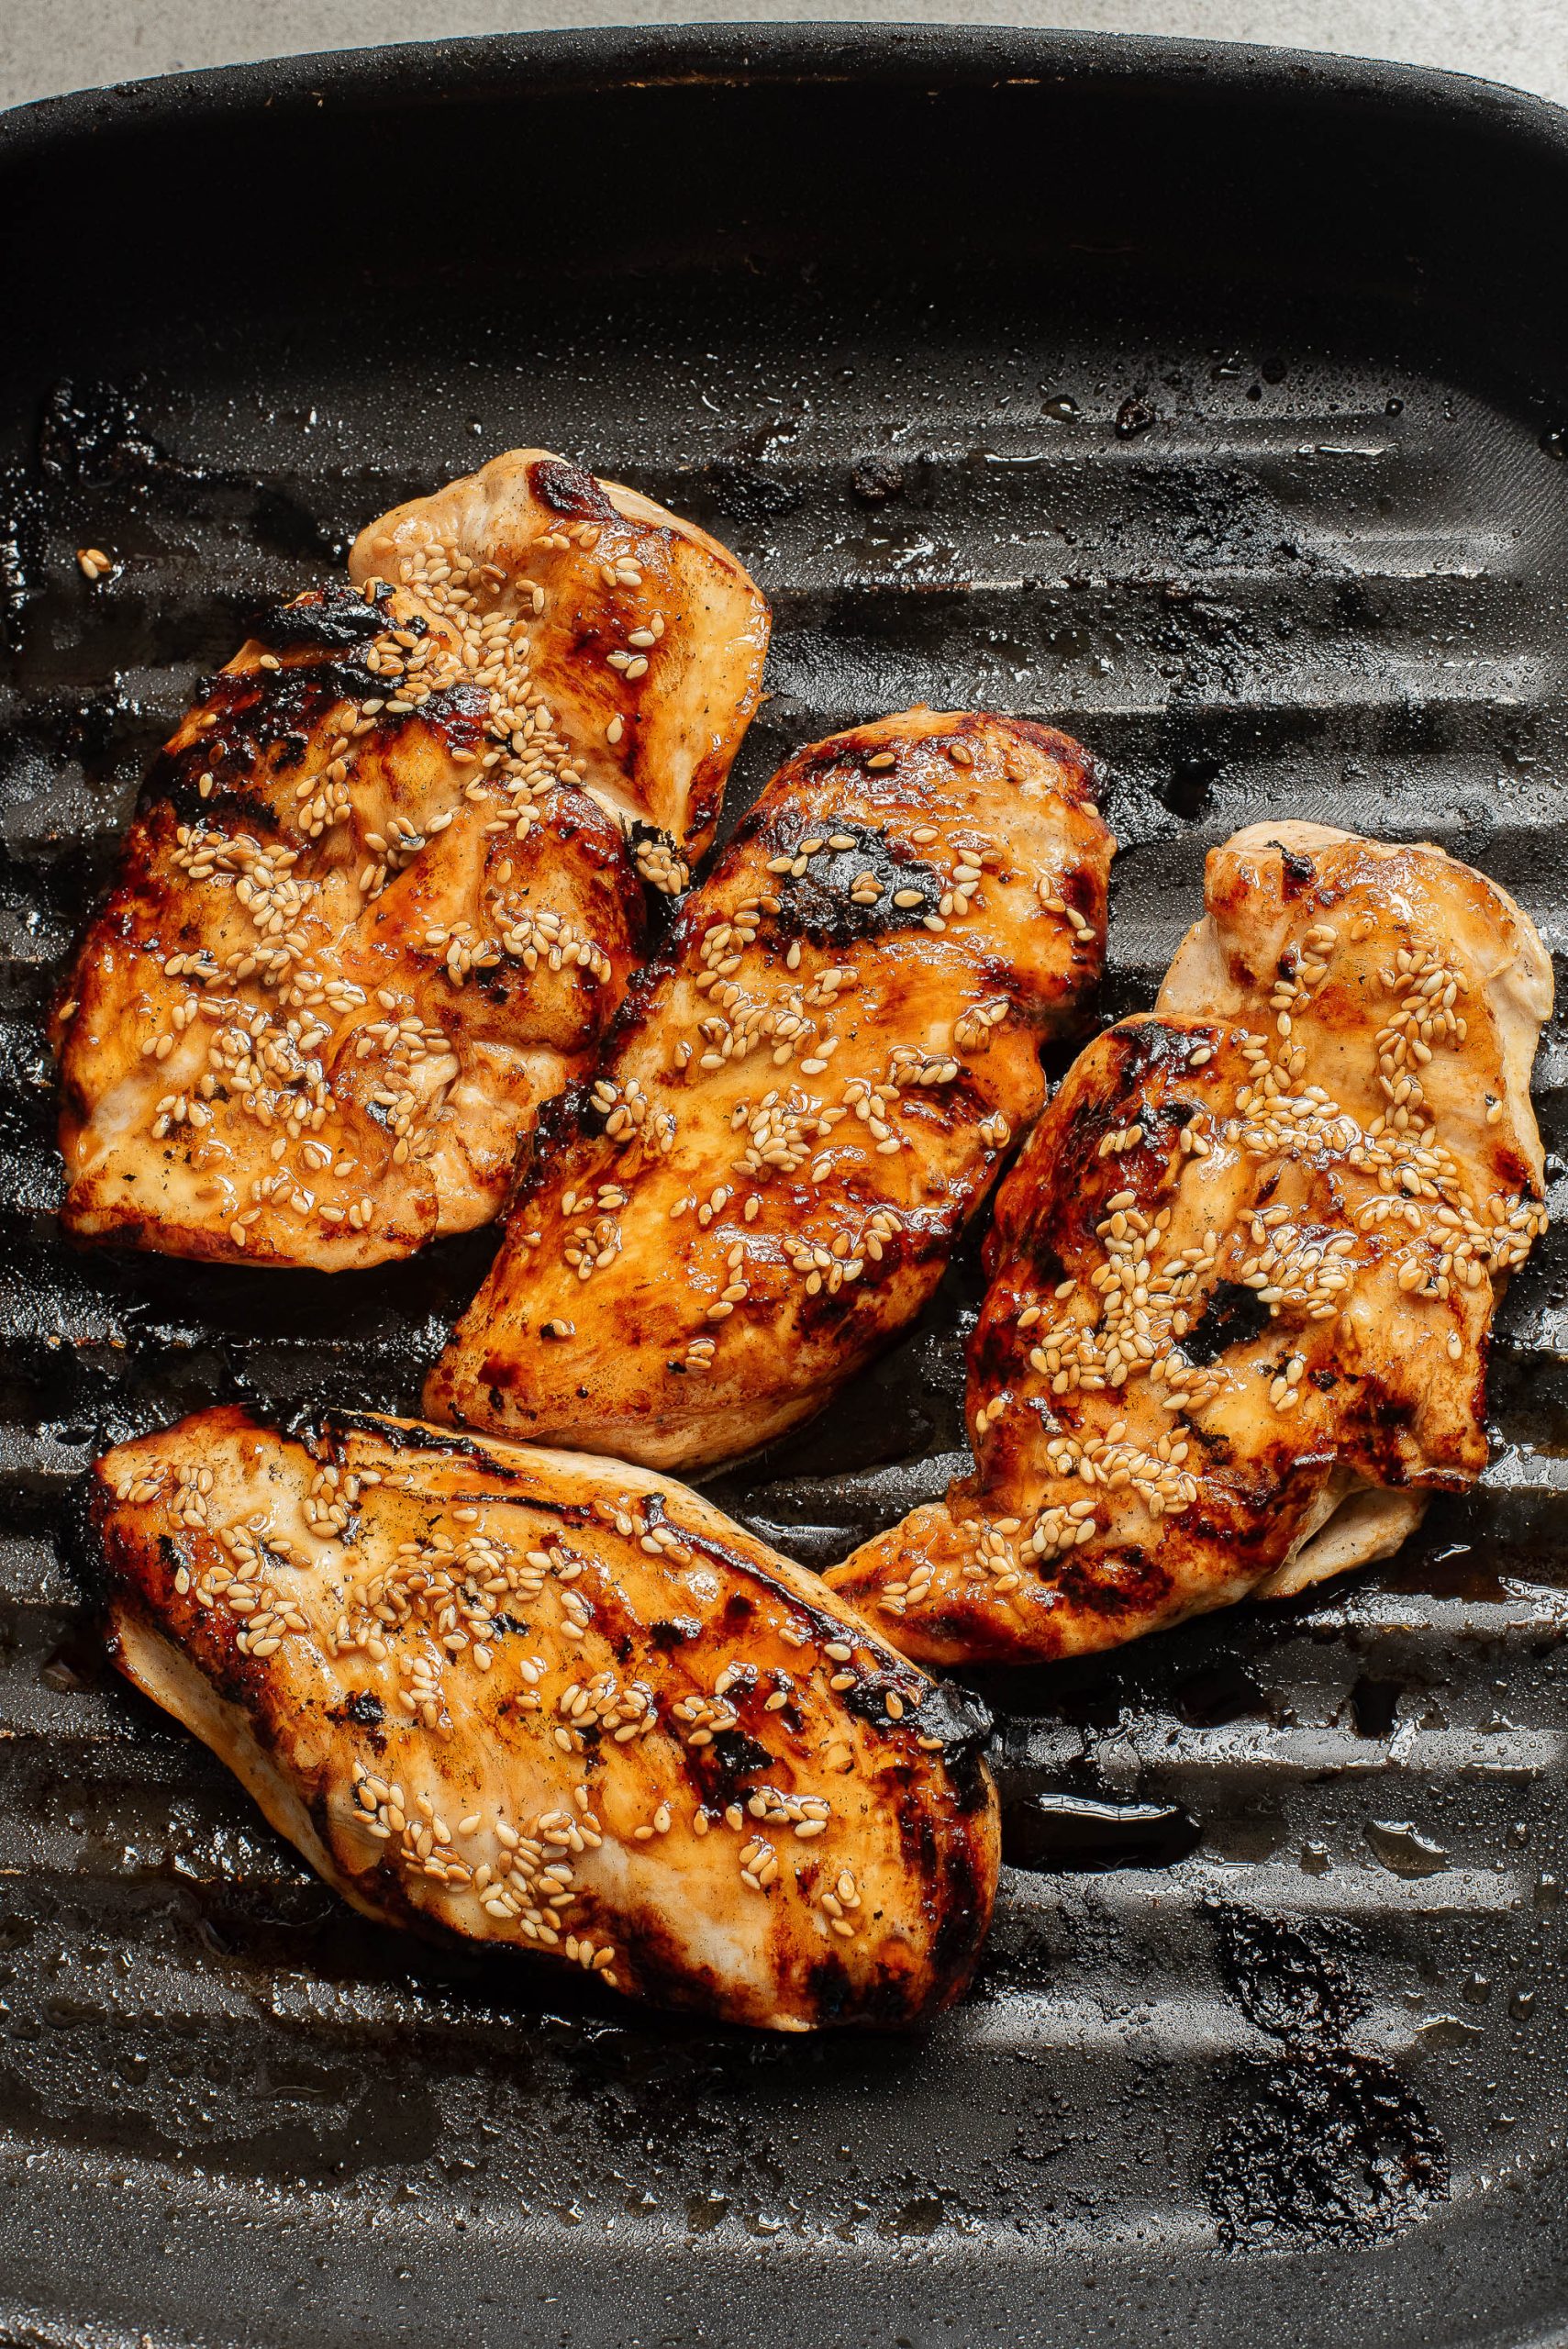 A group of chicken breasts on a grill.